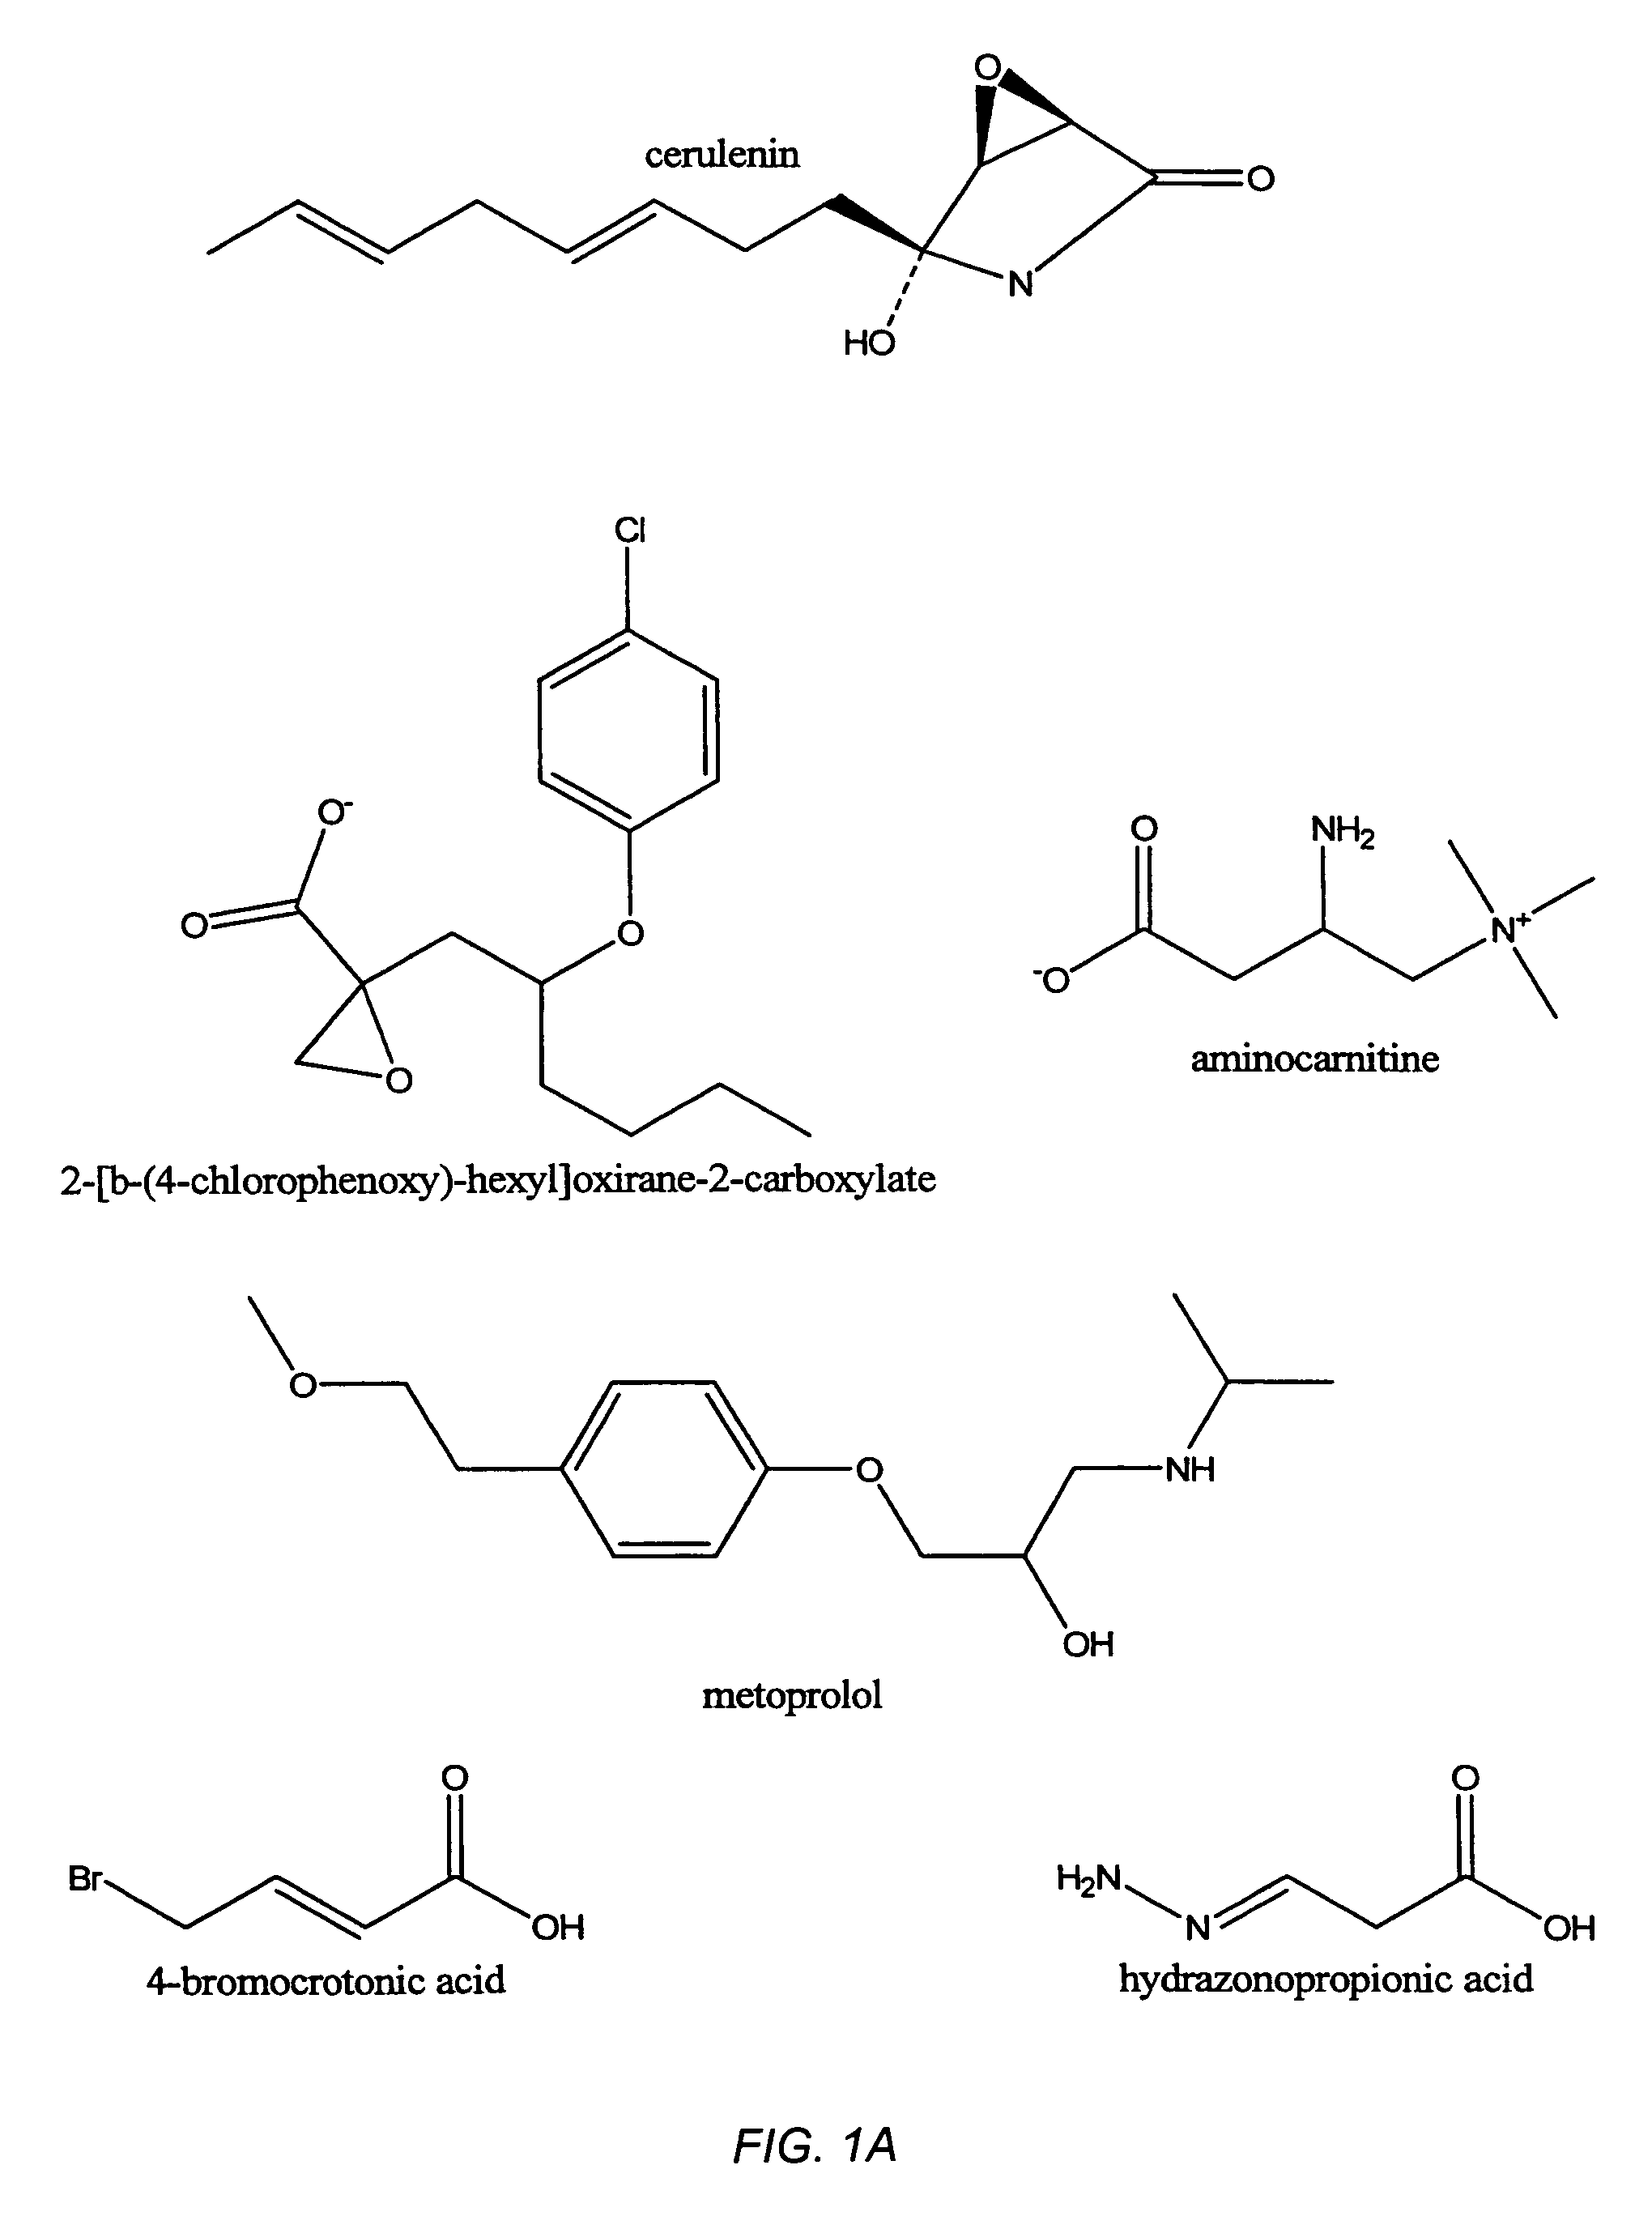 Compositions of UCP inhibitors, Fas antibody, a fatty acid metabolism inhibitor and/or a glucose metabolism inhibitor